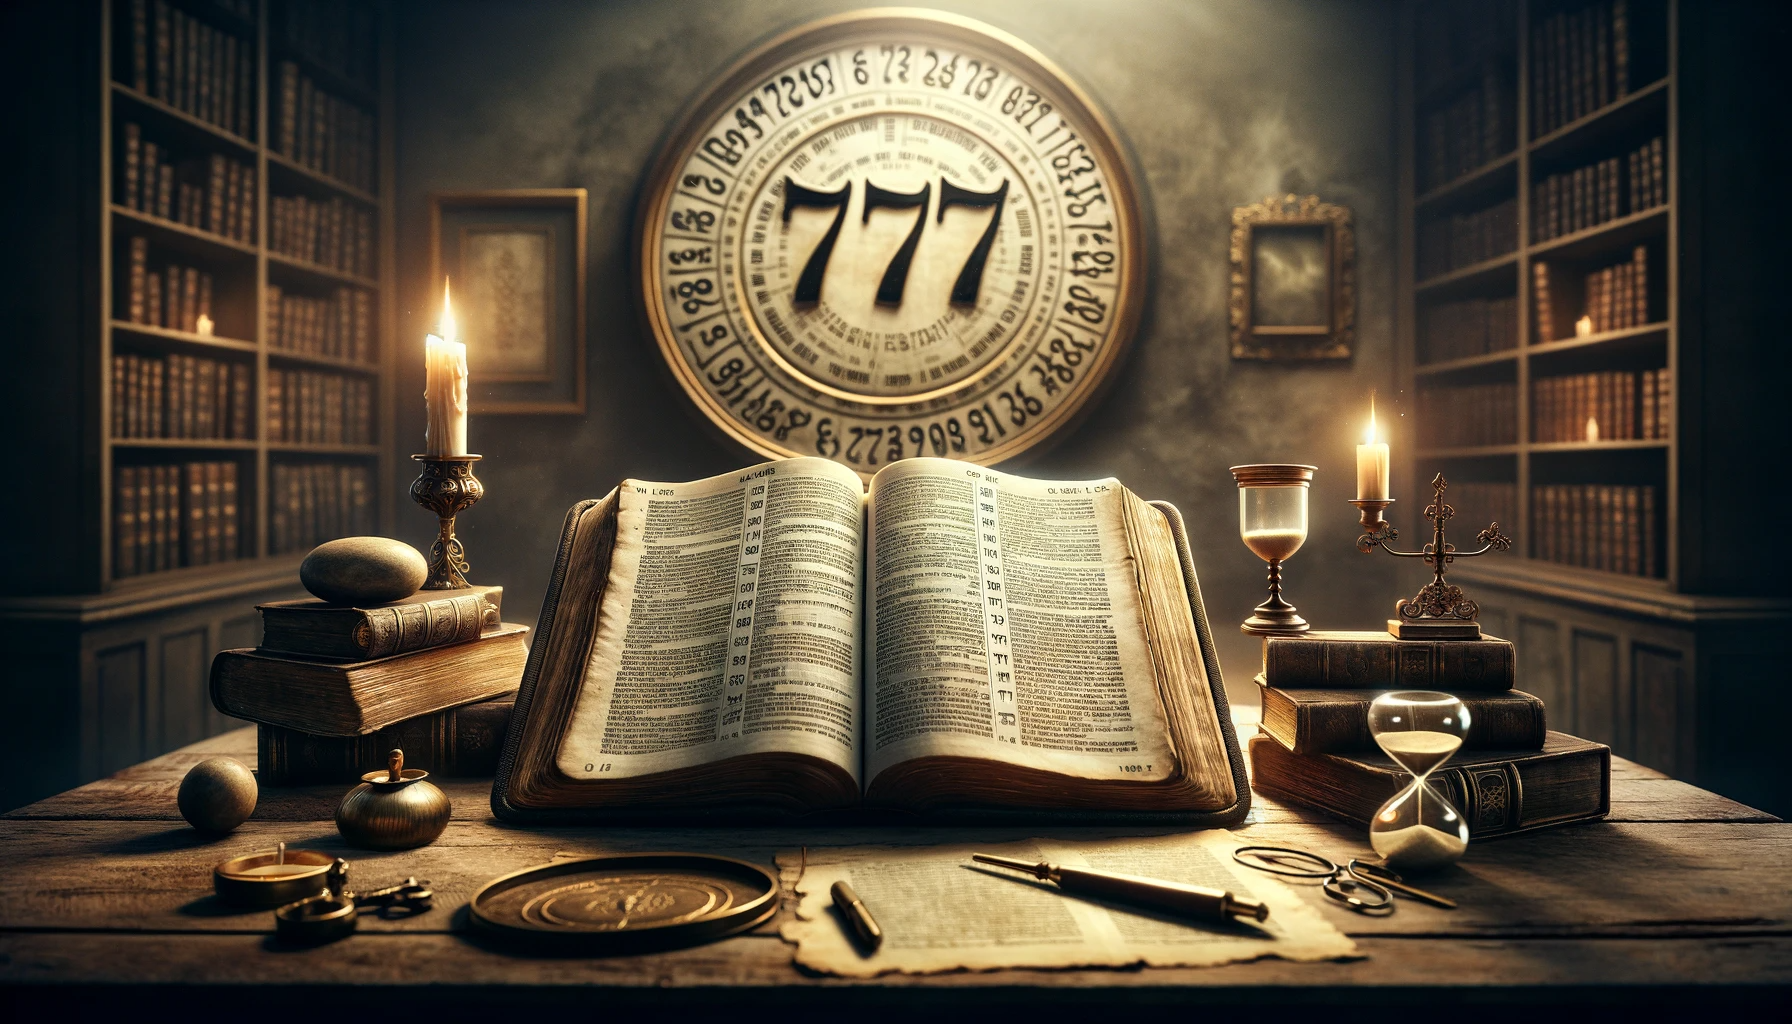 777 meaning in bible